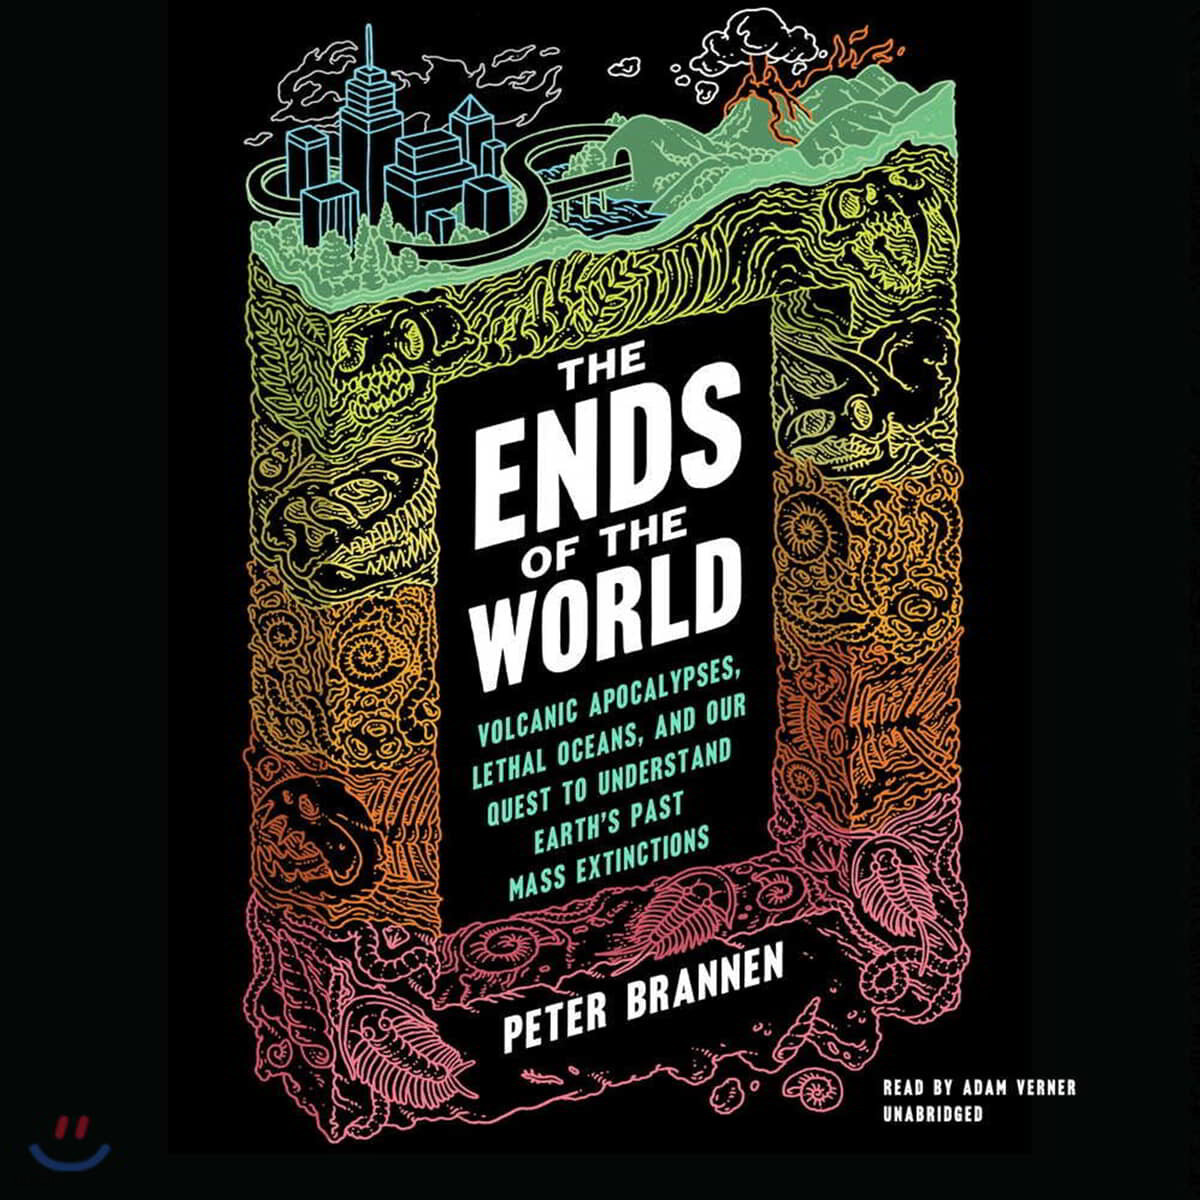 The Ends of the World: Volcanic Apocalypses, Lethal Oceans, and Our Quest to Understand Earth&#39;s Past Mass Extinctions